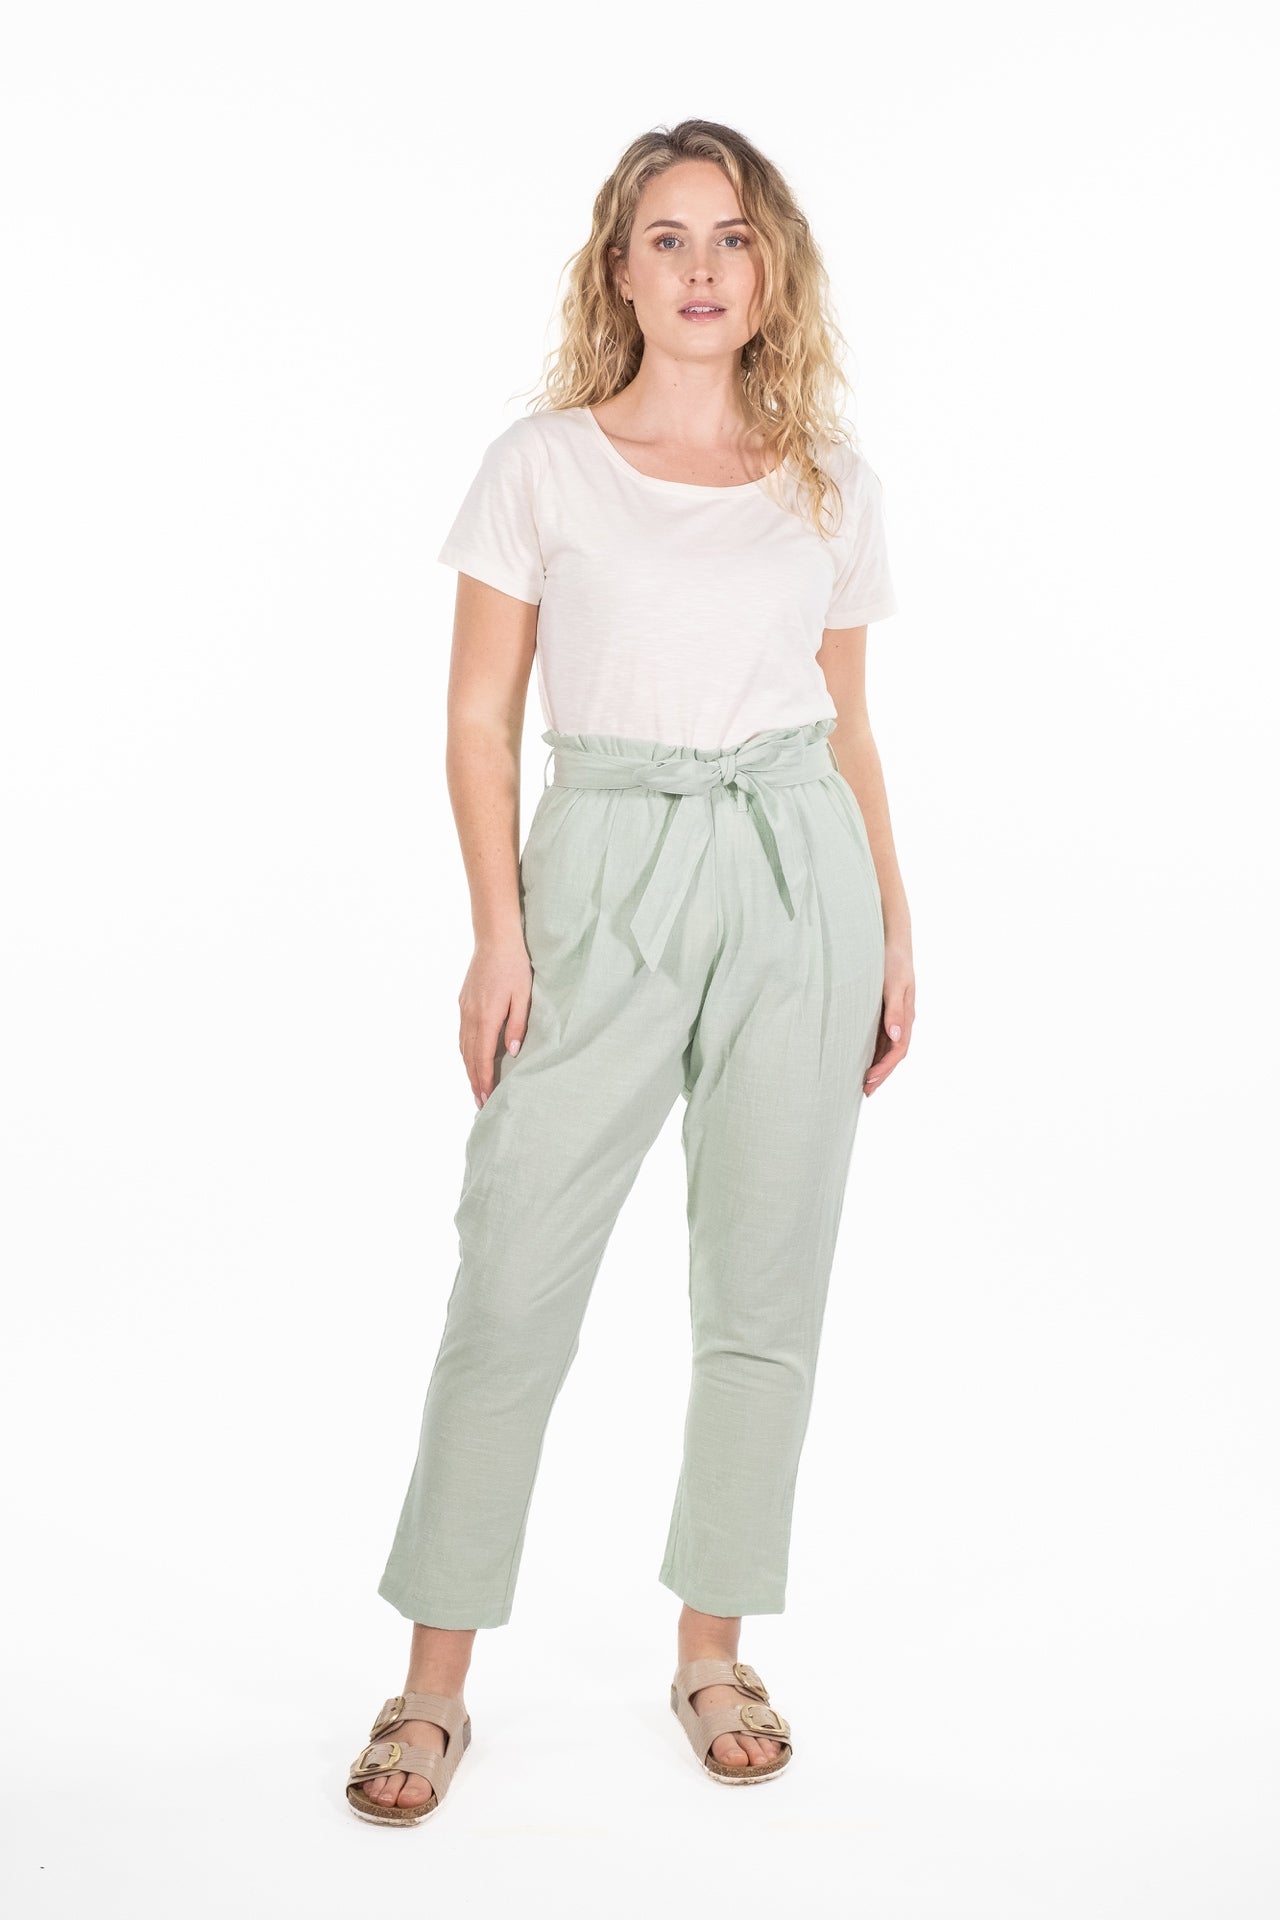 Layla Green Trouser - Rupert and Buckley - Trousers